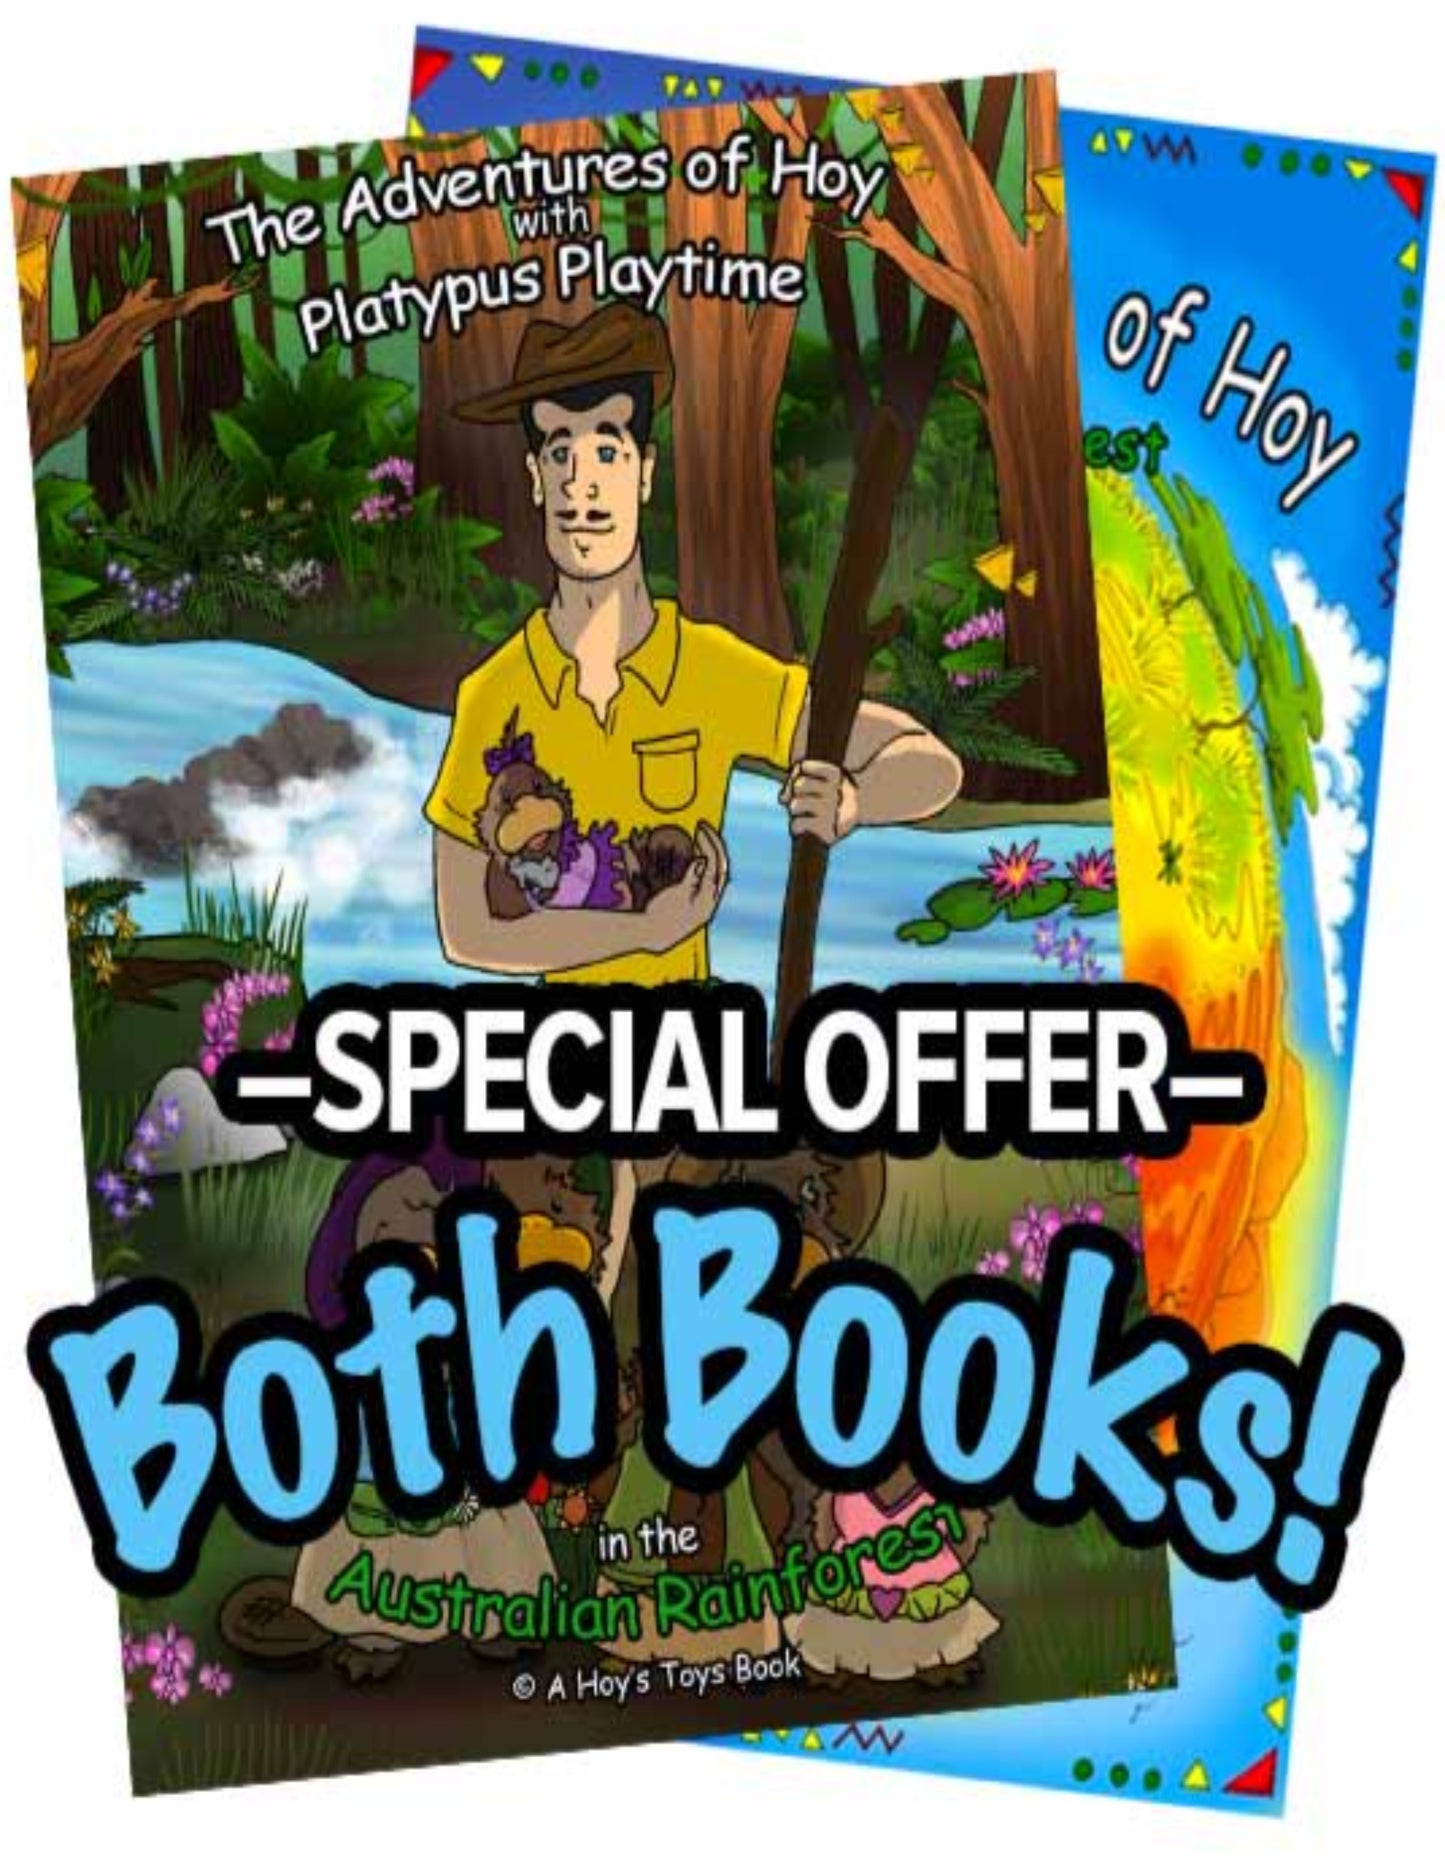 Book Bundle: The Adventures of Hoy with Platypus Playtime reader book AND The Adventures of Hoy with Platypus Playtime  Australian Rainforest Activity Book